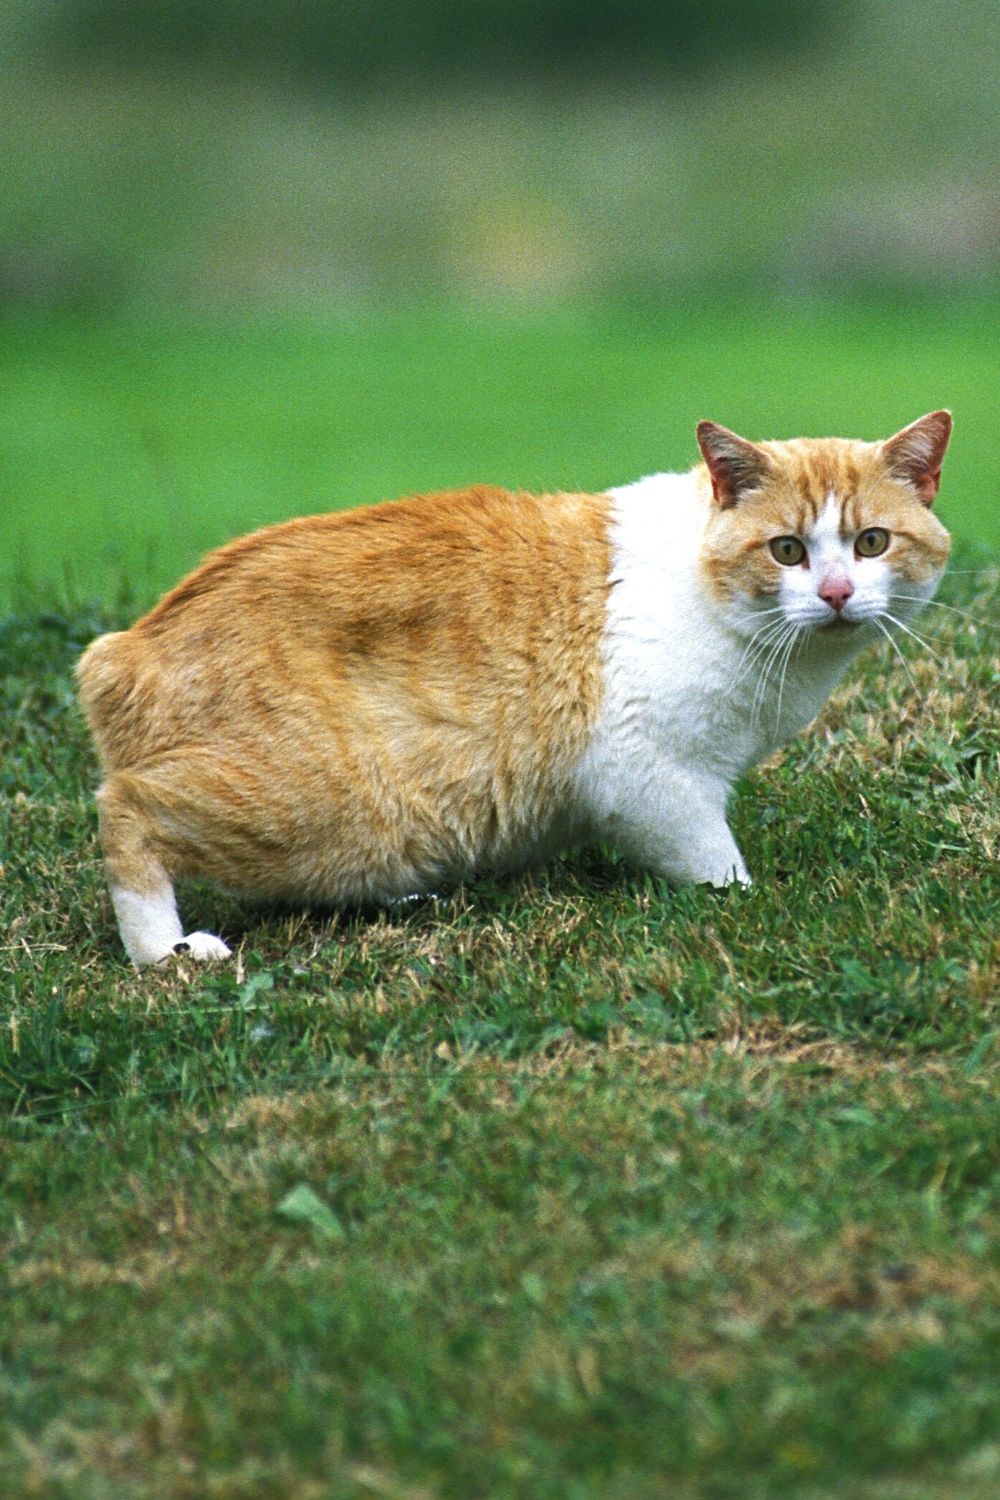 Though cats can survive without tails (like the Manx cat), the offspring of 2 tailless cats won't survive